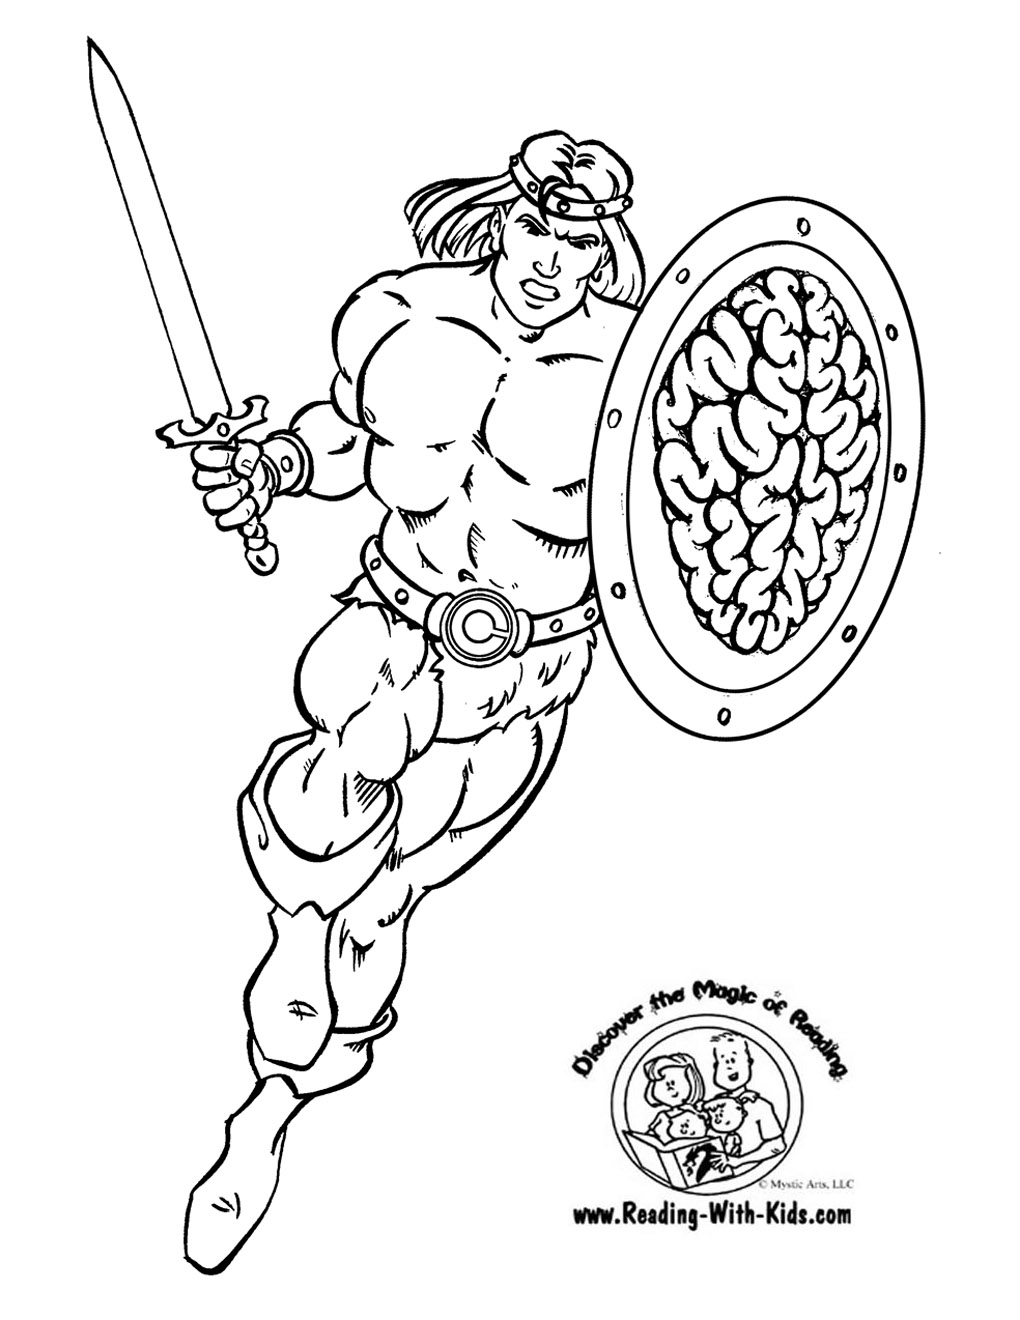 Hero Coloring Page